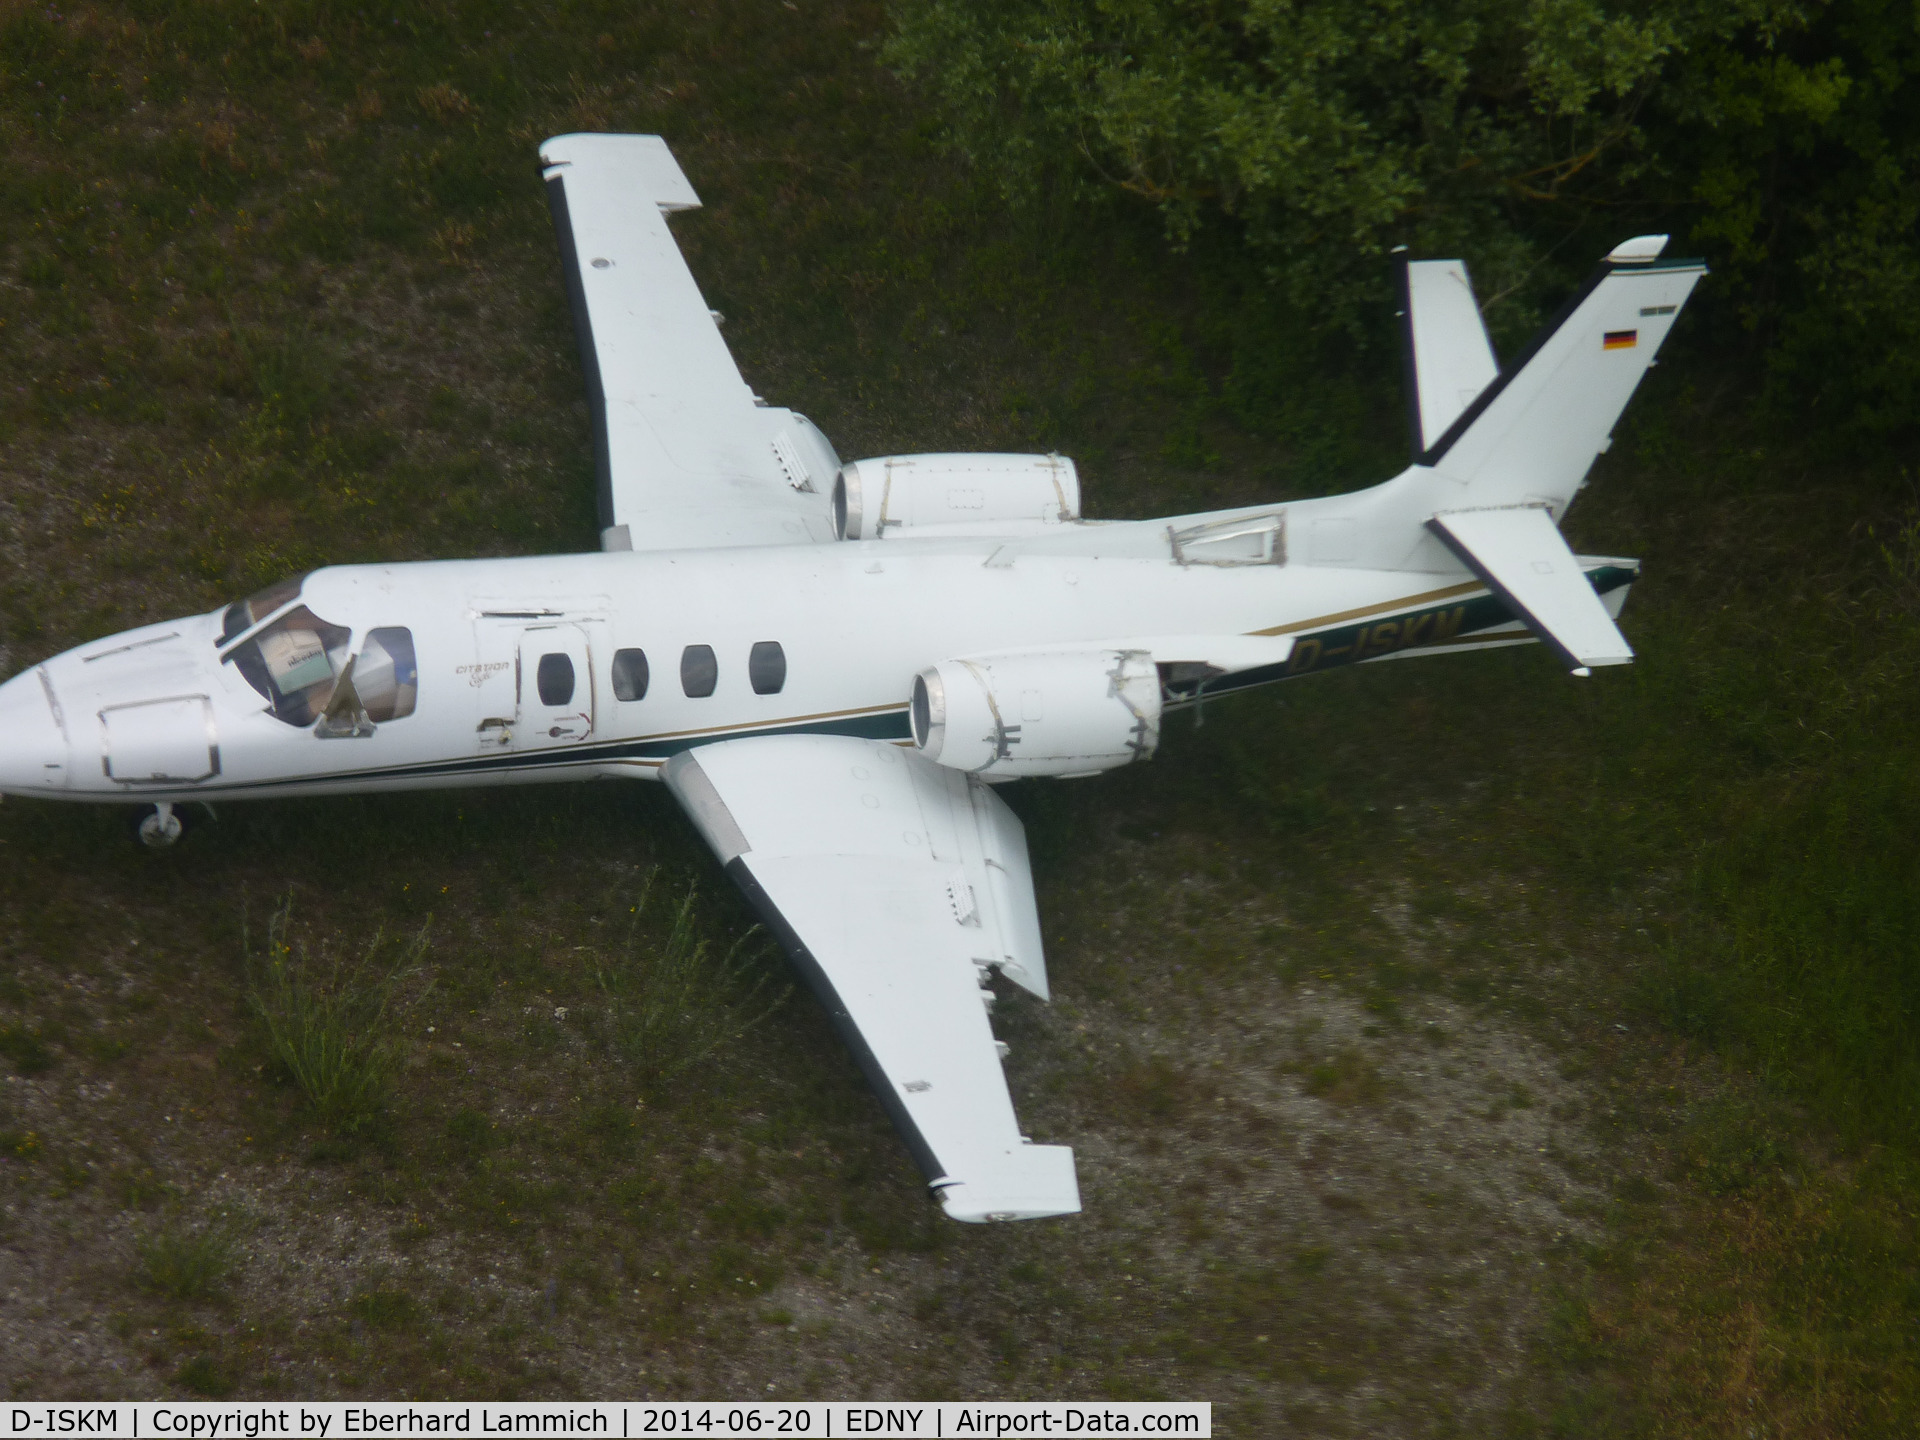 D-ISKM, 1976 Cessna 500 Citation I C/N 500-0313, Taken from Airship on approach to EDNY Airship base (west side of airport)